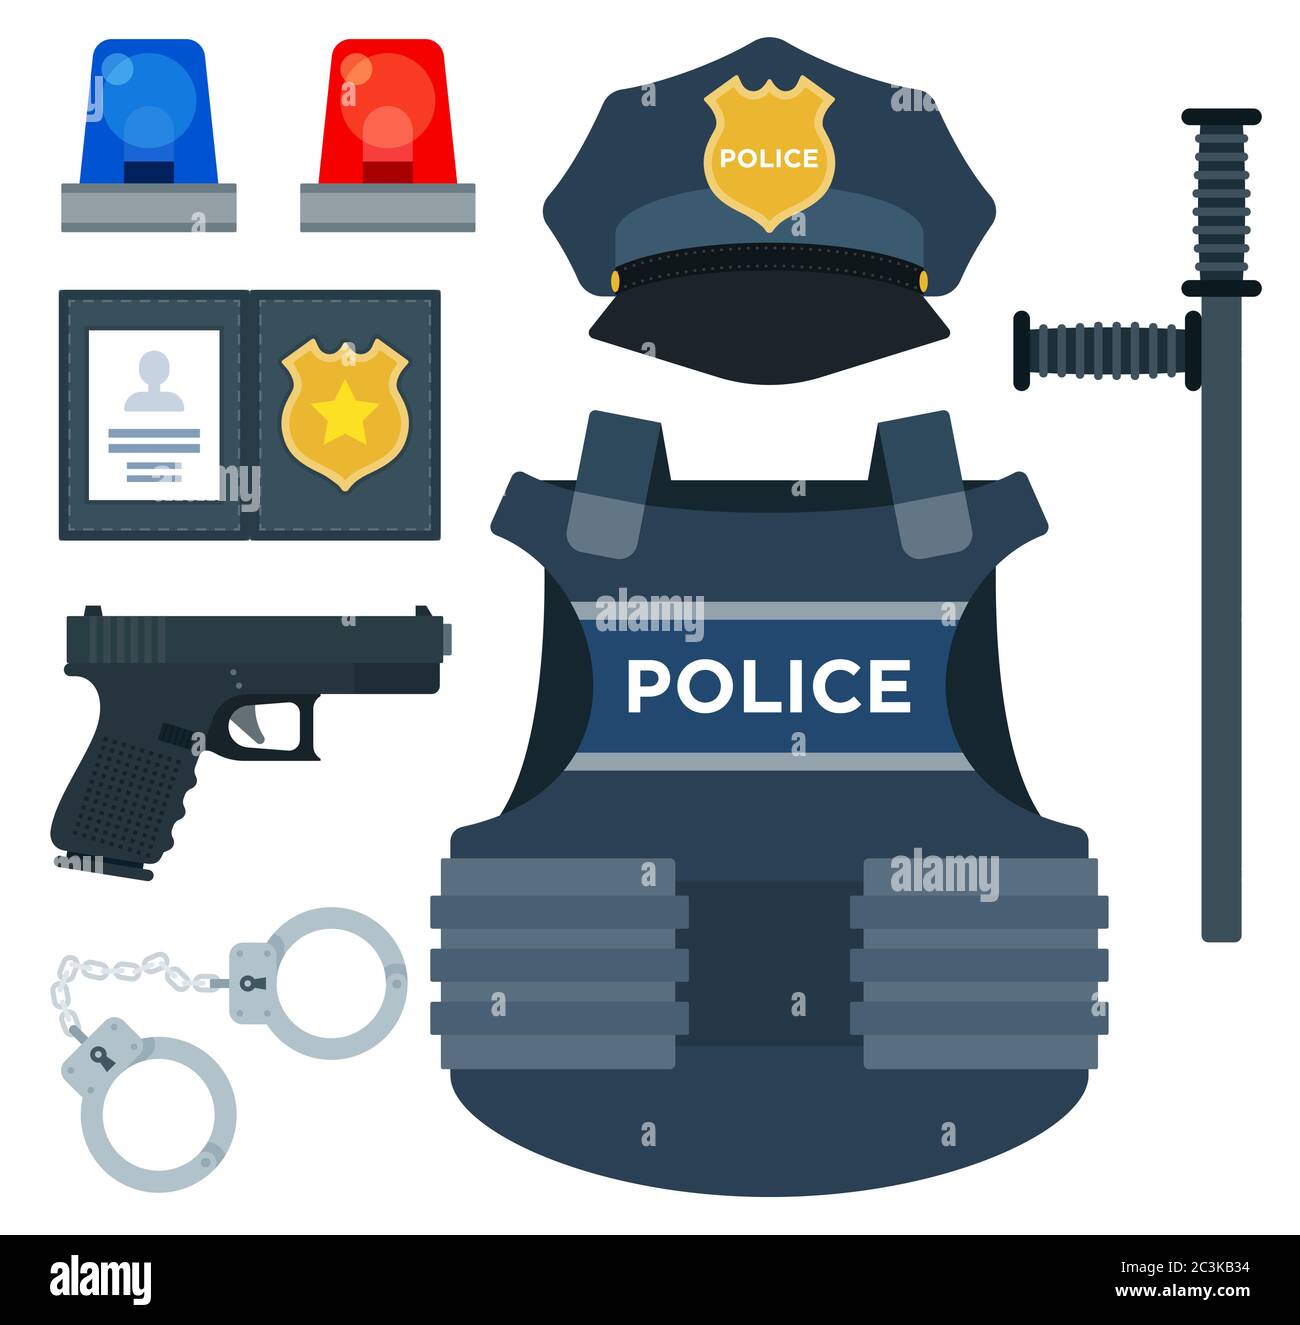 A set of special police uniforms and protective equipment vector illustration in a flat design Stock Vector